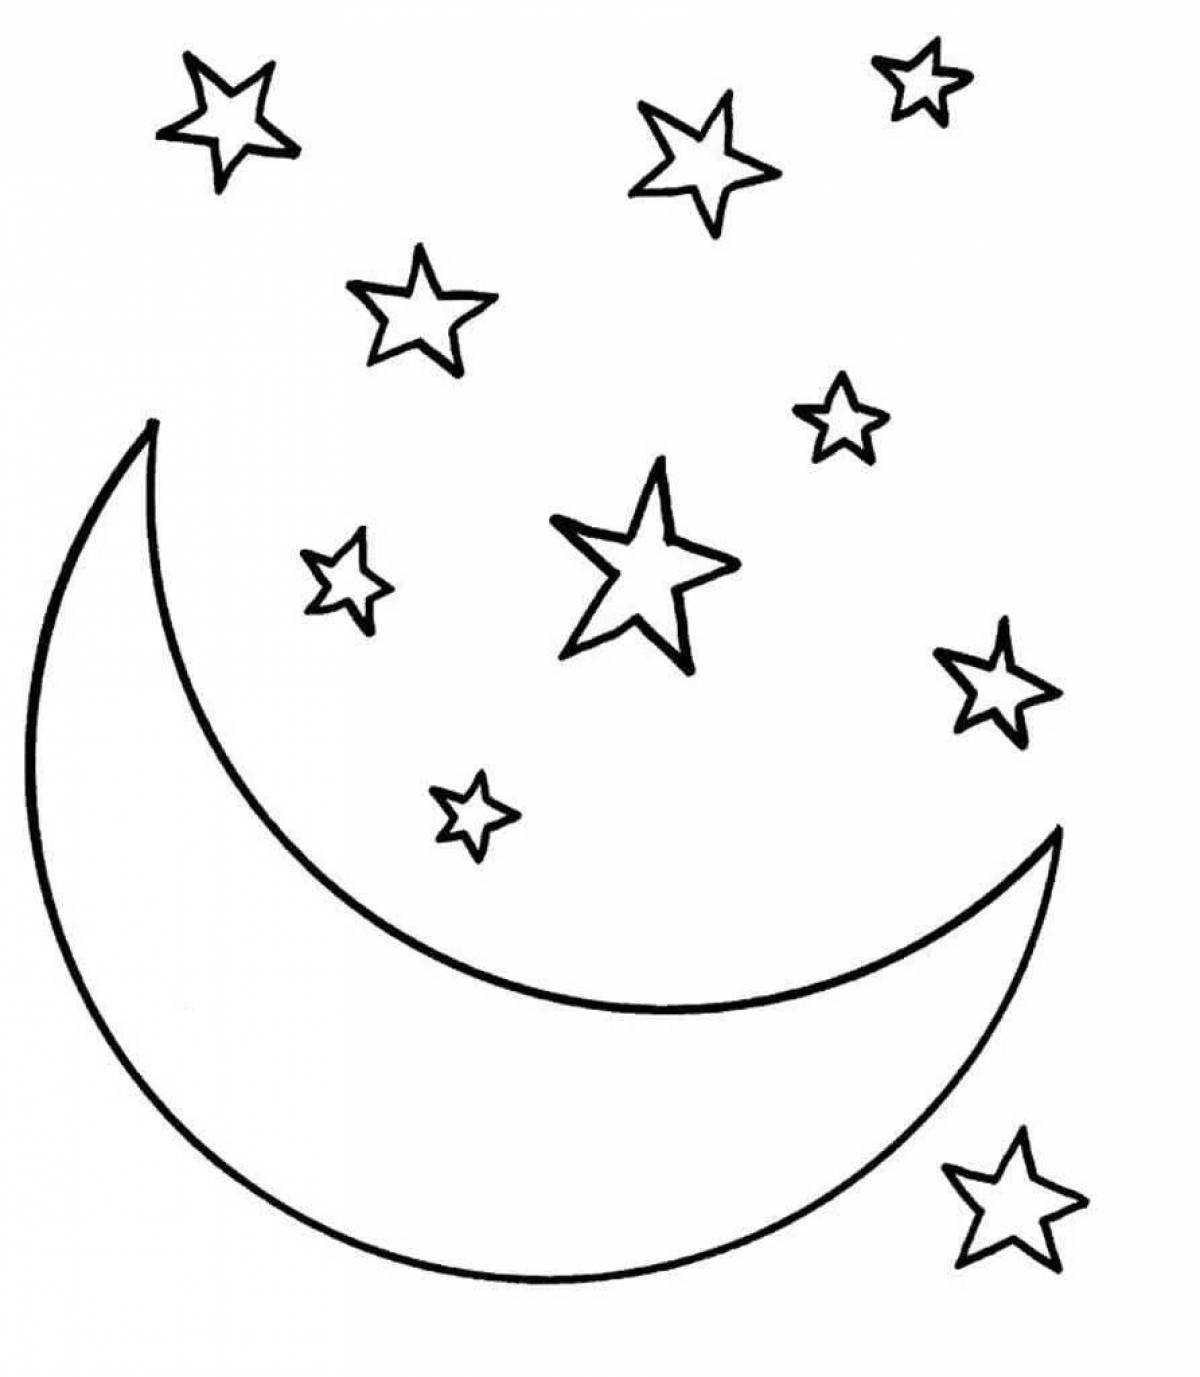 Generous starry sky coloring book for kids